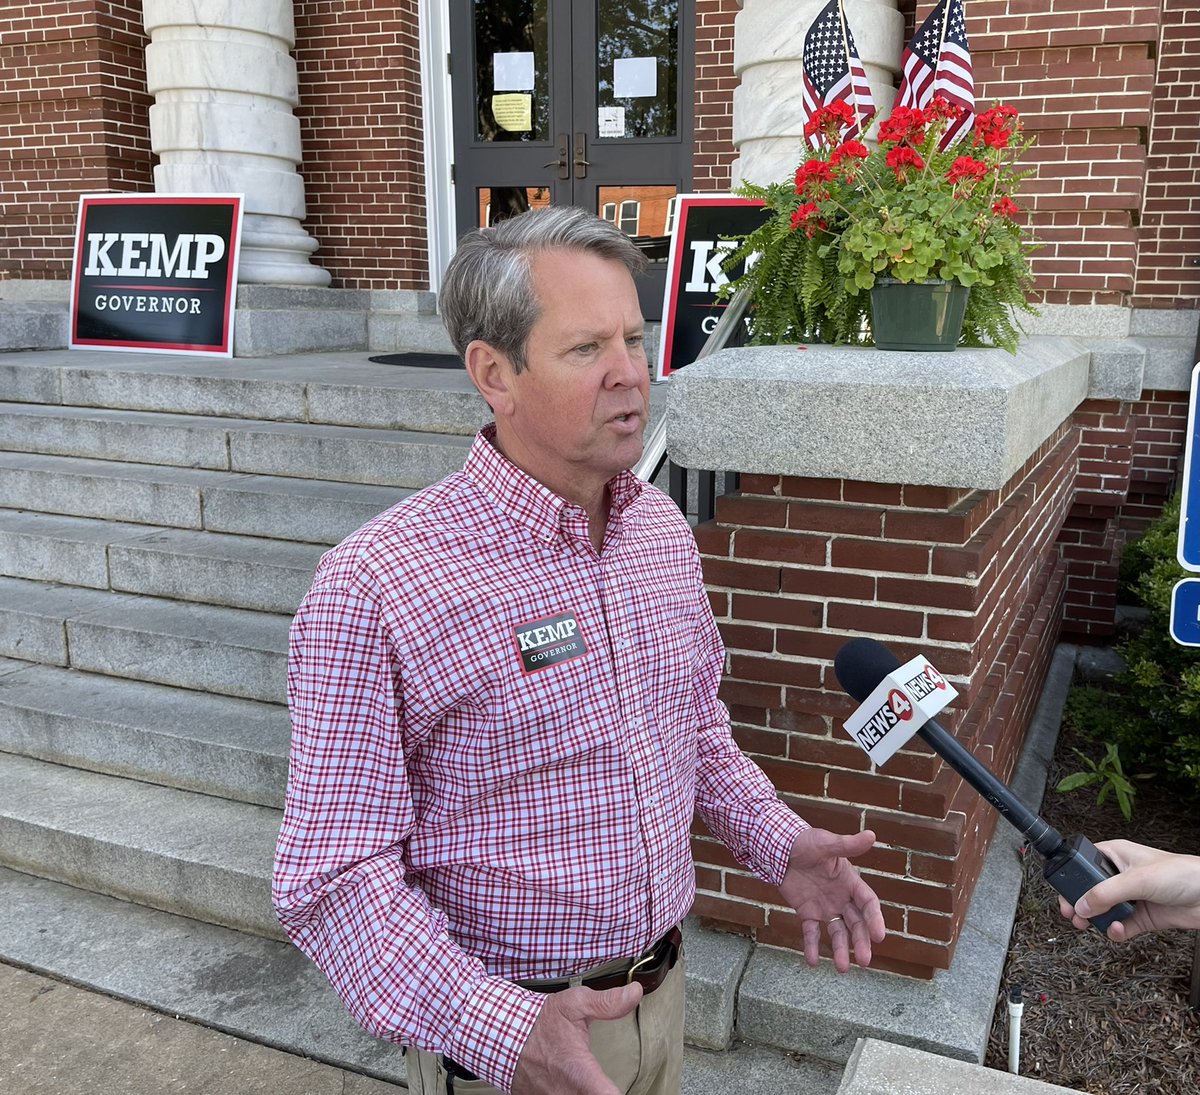 “The goal every day is to make sure Stacey Abrams is never our governor or our next president. We’ve had a lot of success in Georgia, and we have to keep our state moving forward.”

From here till November, no one will outwork #TeamKemp. The momentum is real. #gapol